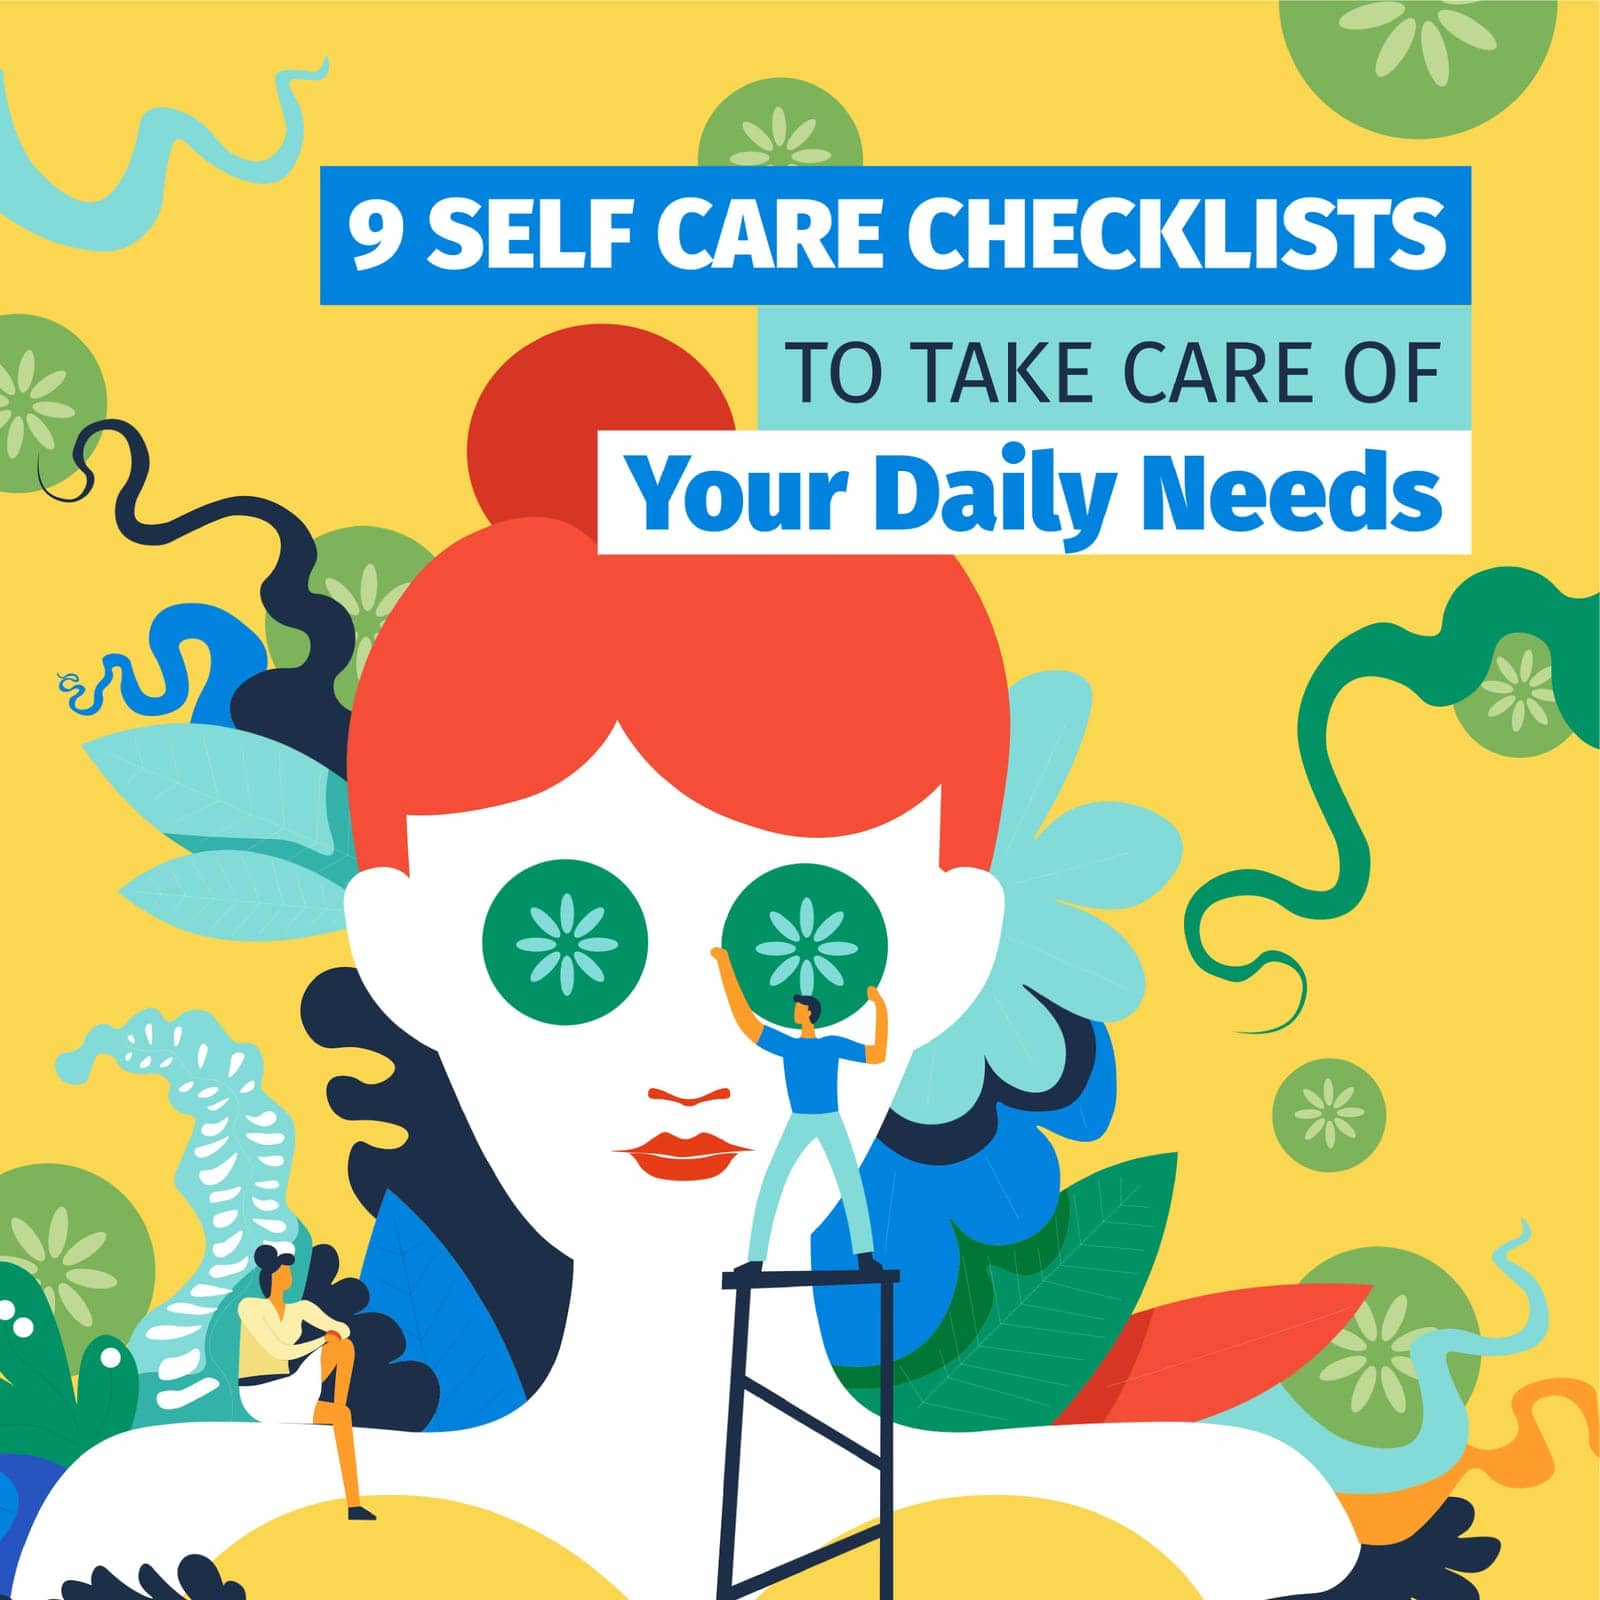 Self care checklists for female daily needs vector by Sonulkaster